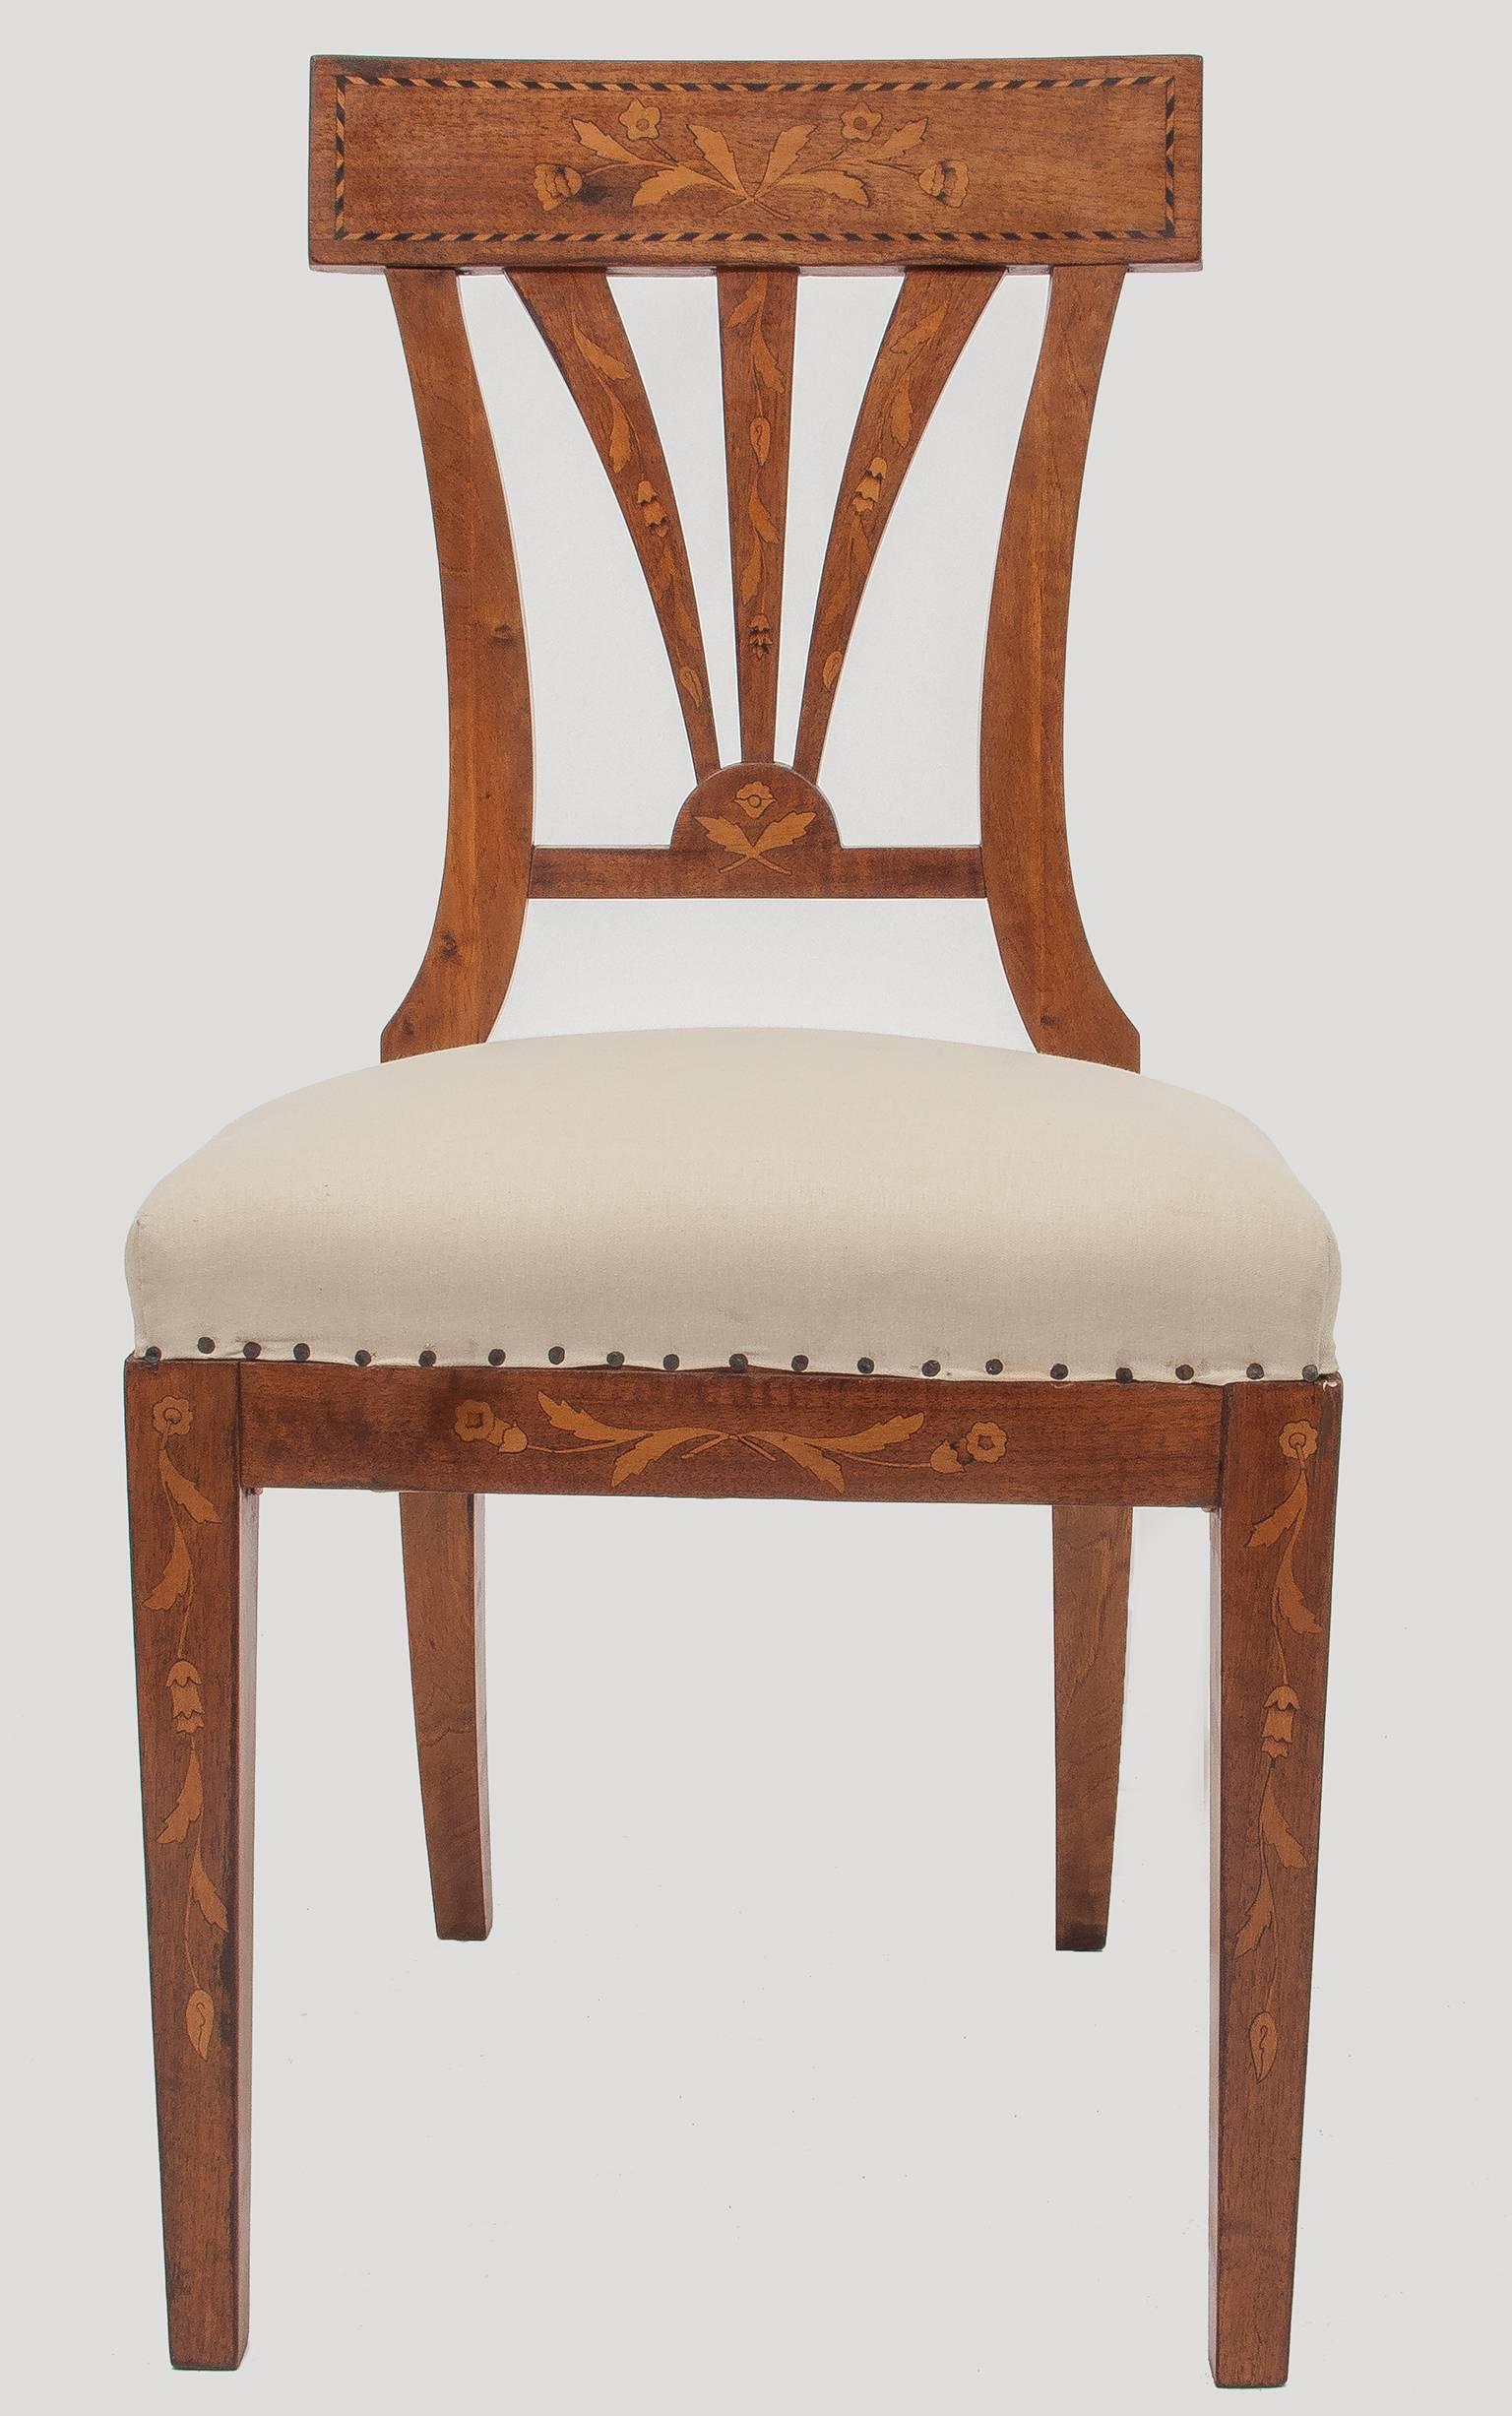 Inlaid Biedermeier walnut chairs set,  very elegant, with new clean padding. Very interesting price for closing activities (my cost).
M/774.